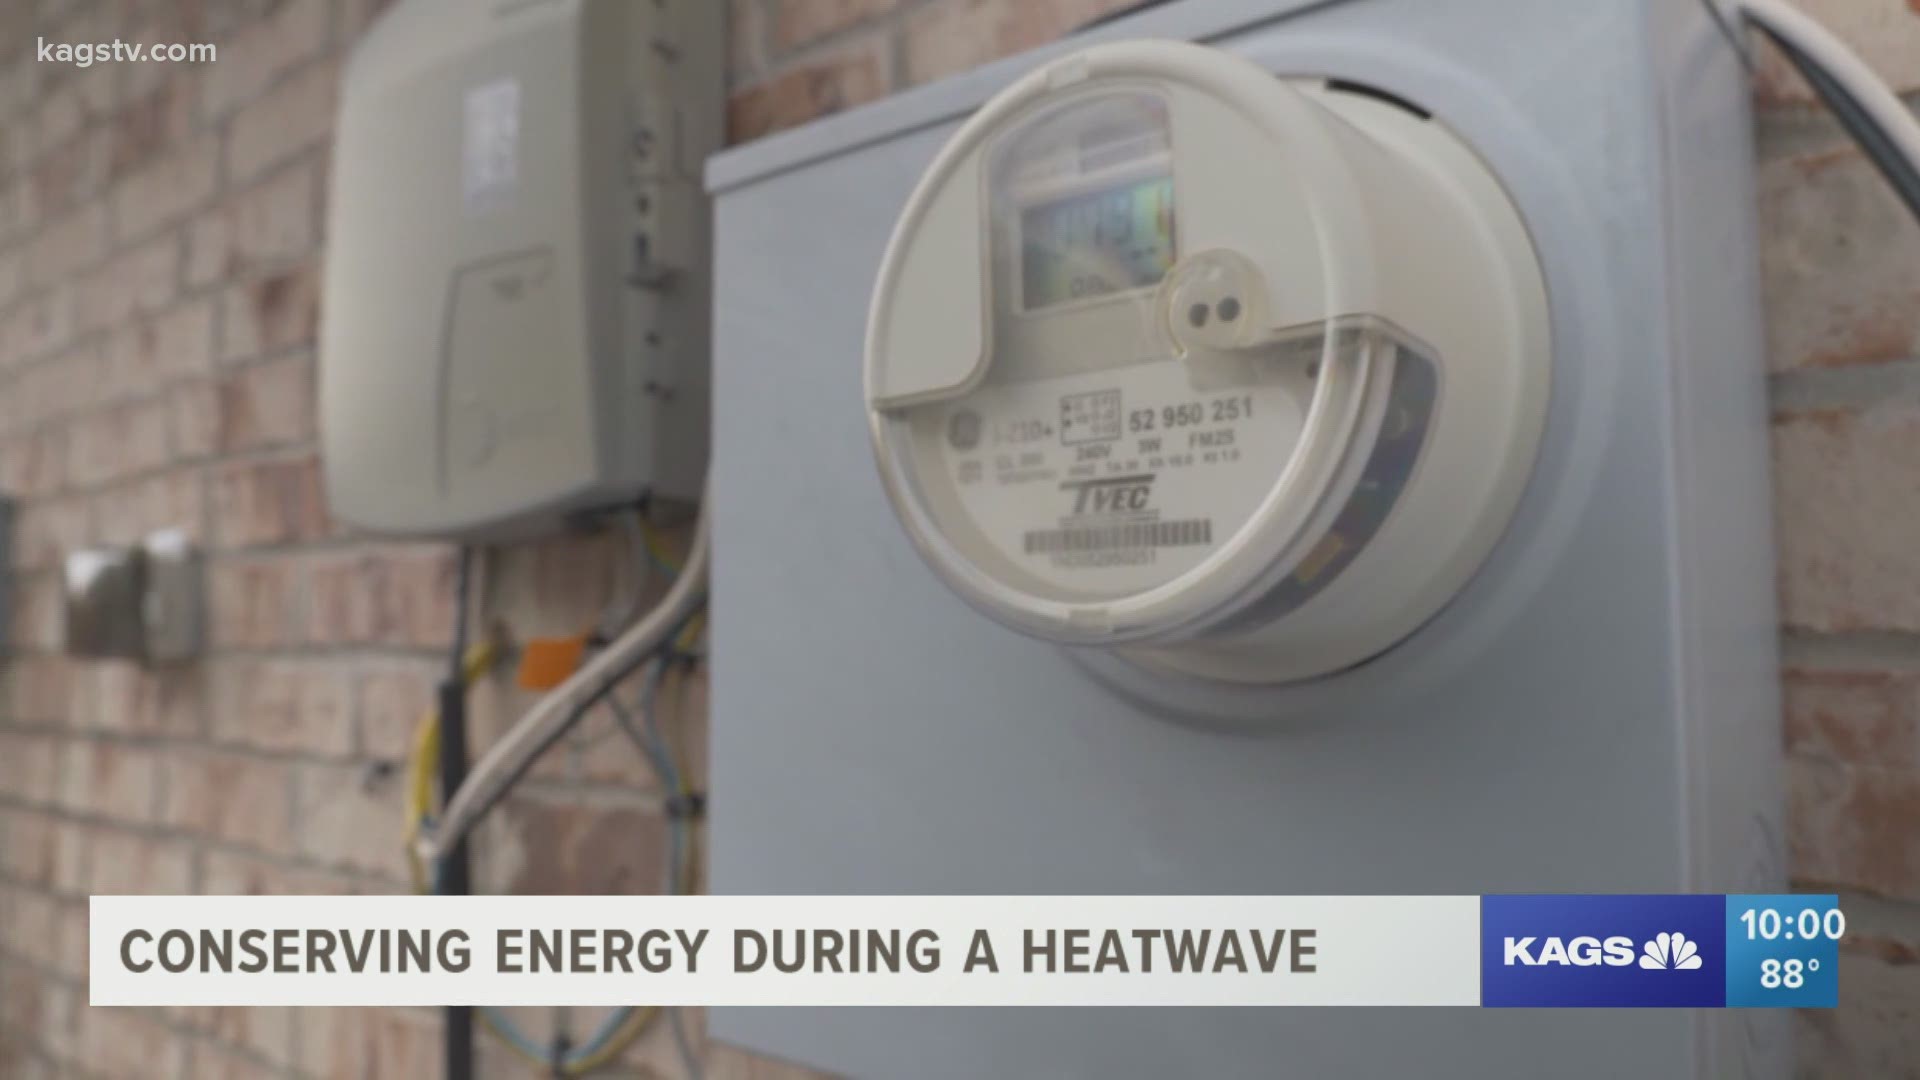 ERCOT is urging customers to conserve energy. That may not be that easy.